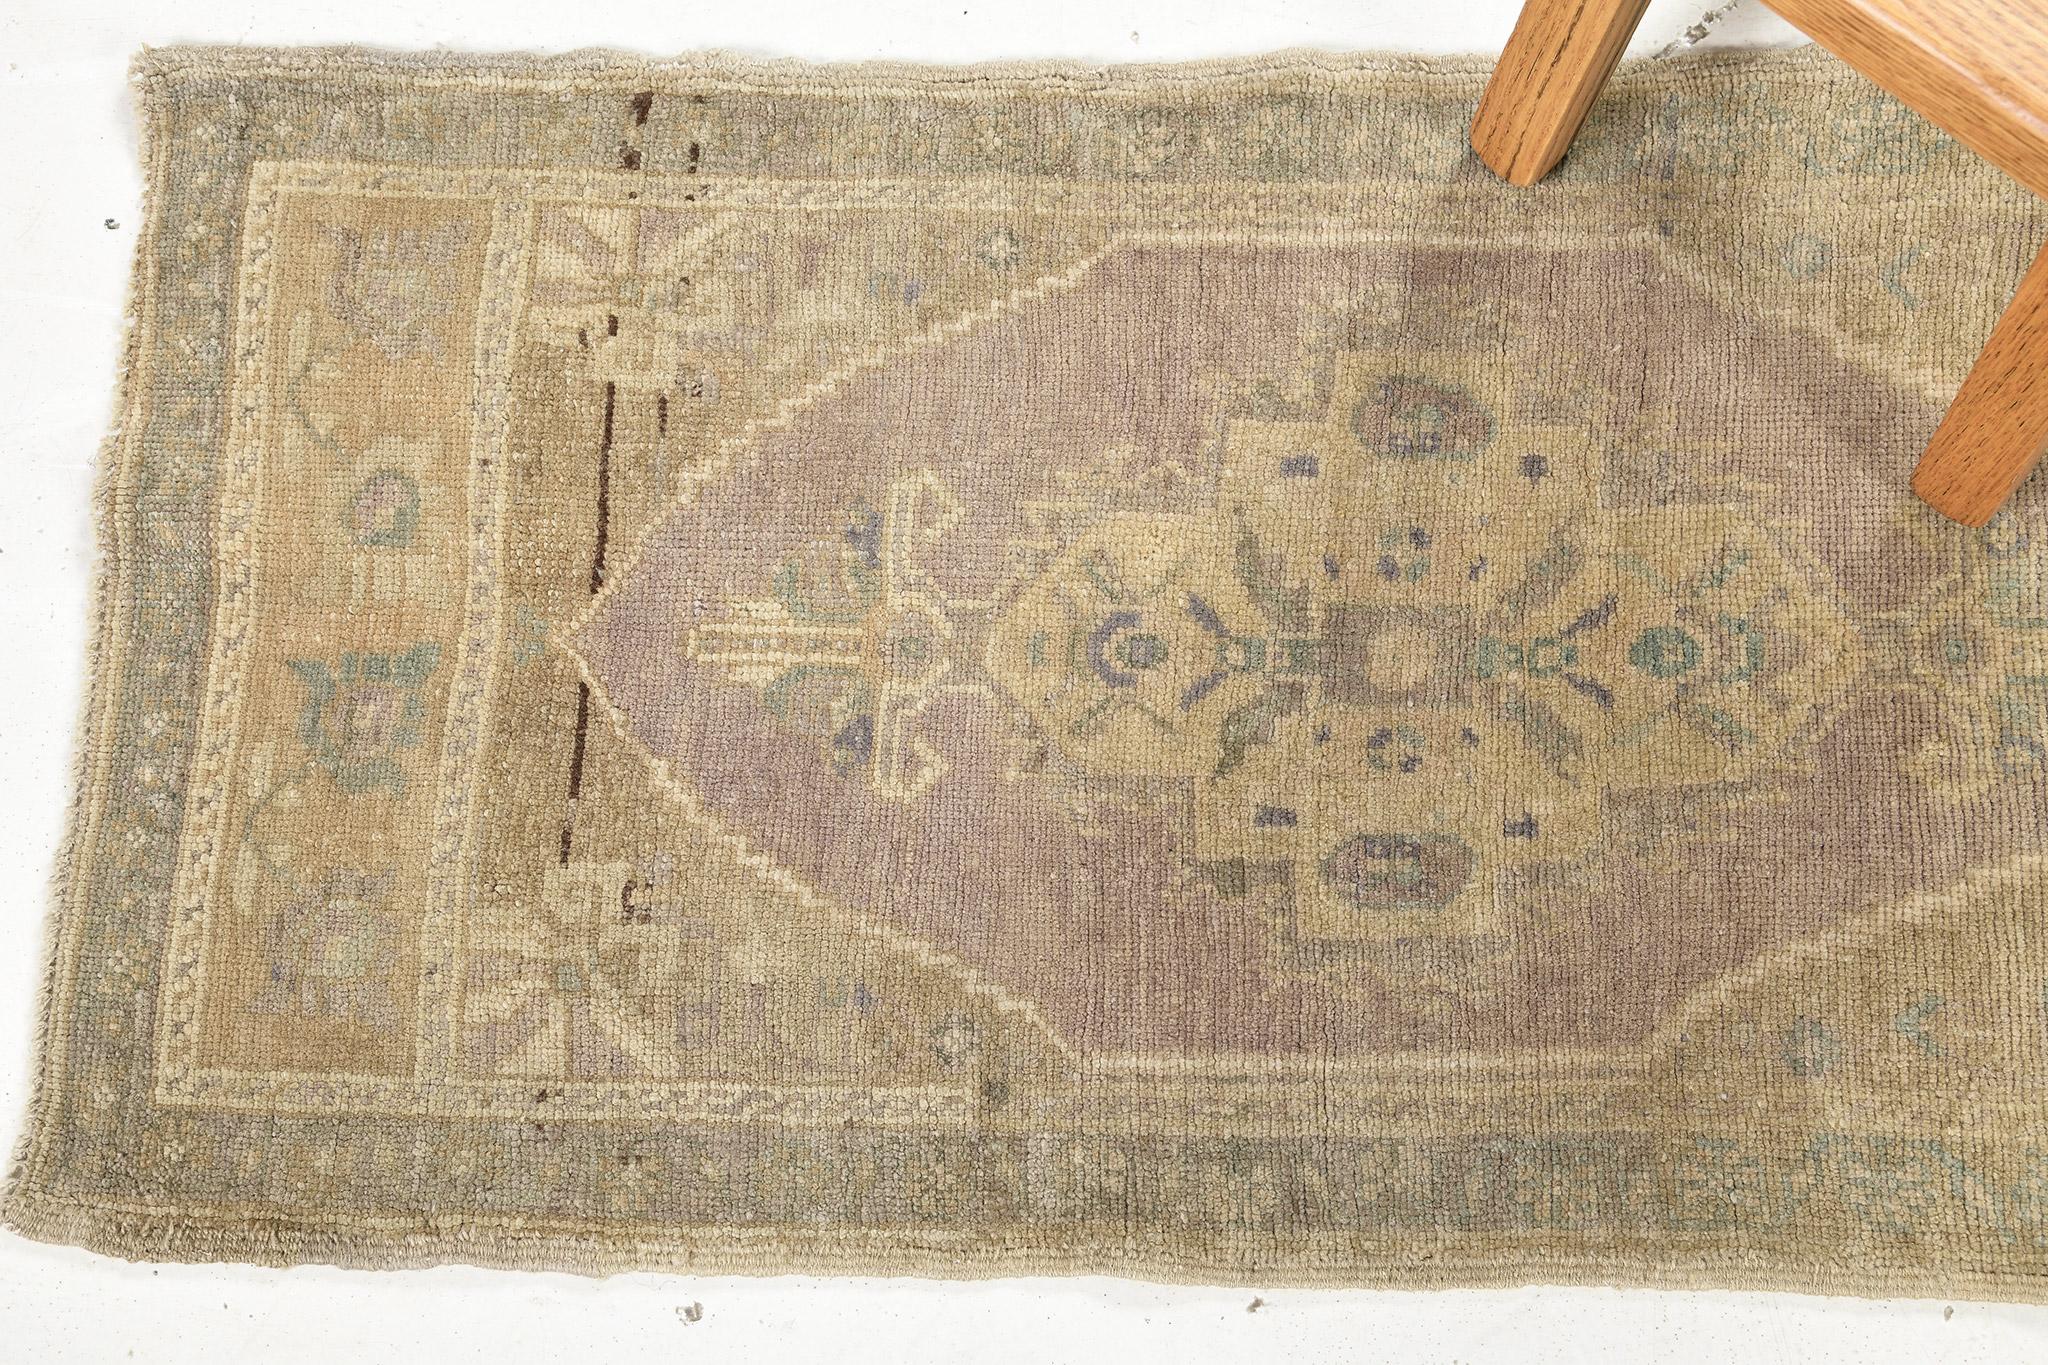 Mehraban Vintage Turkish Anatolian Rug In Good Condition For Sale In WEST HOLLYWOOD, CA